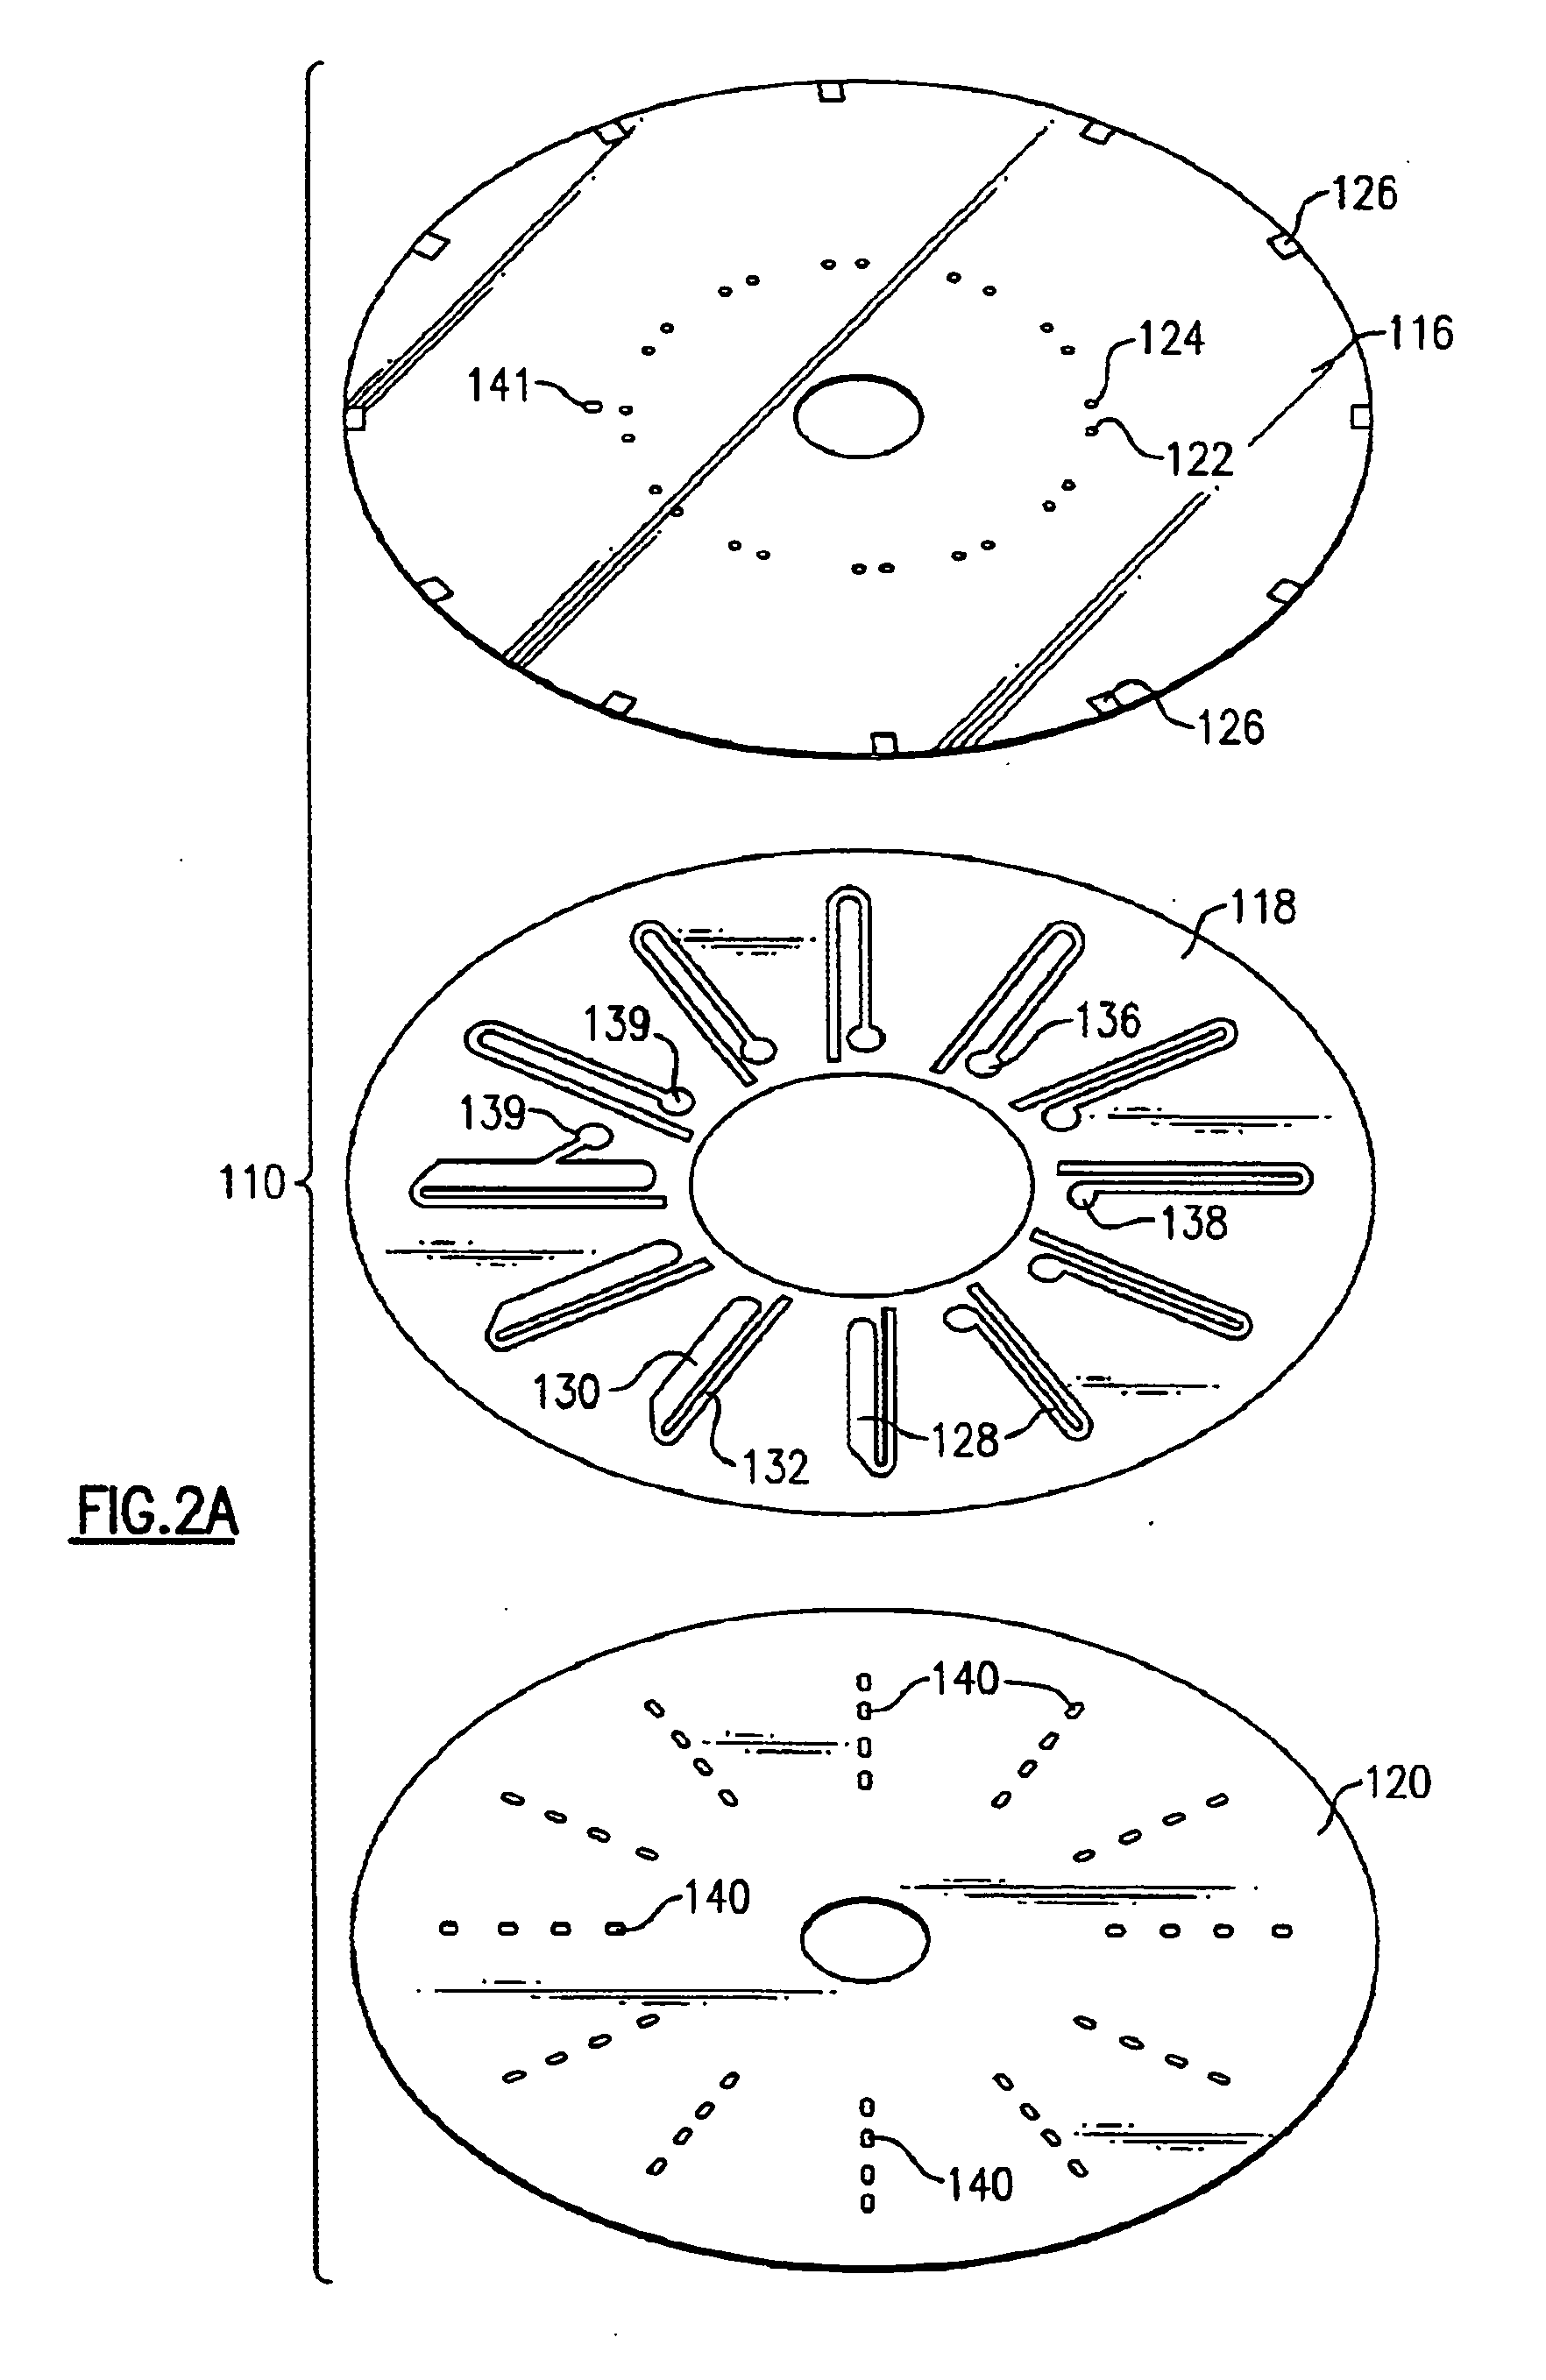 Surface assembly for immobilizing DNA capture probes in genetic assays using enzymatic reactions to generate signal in optical bio-discs and methods relating thereto